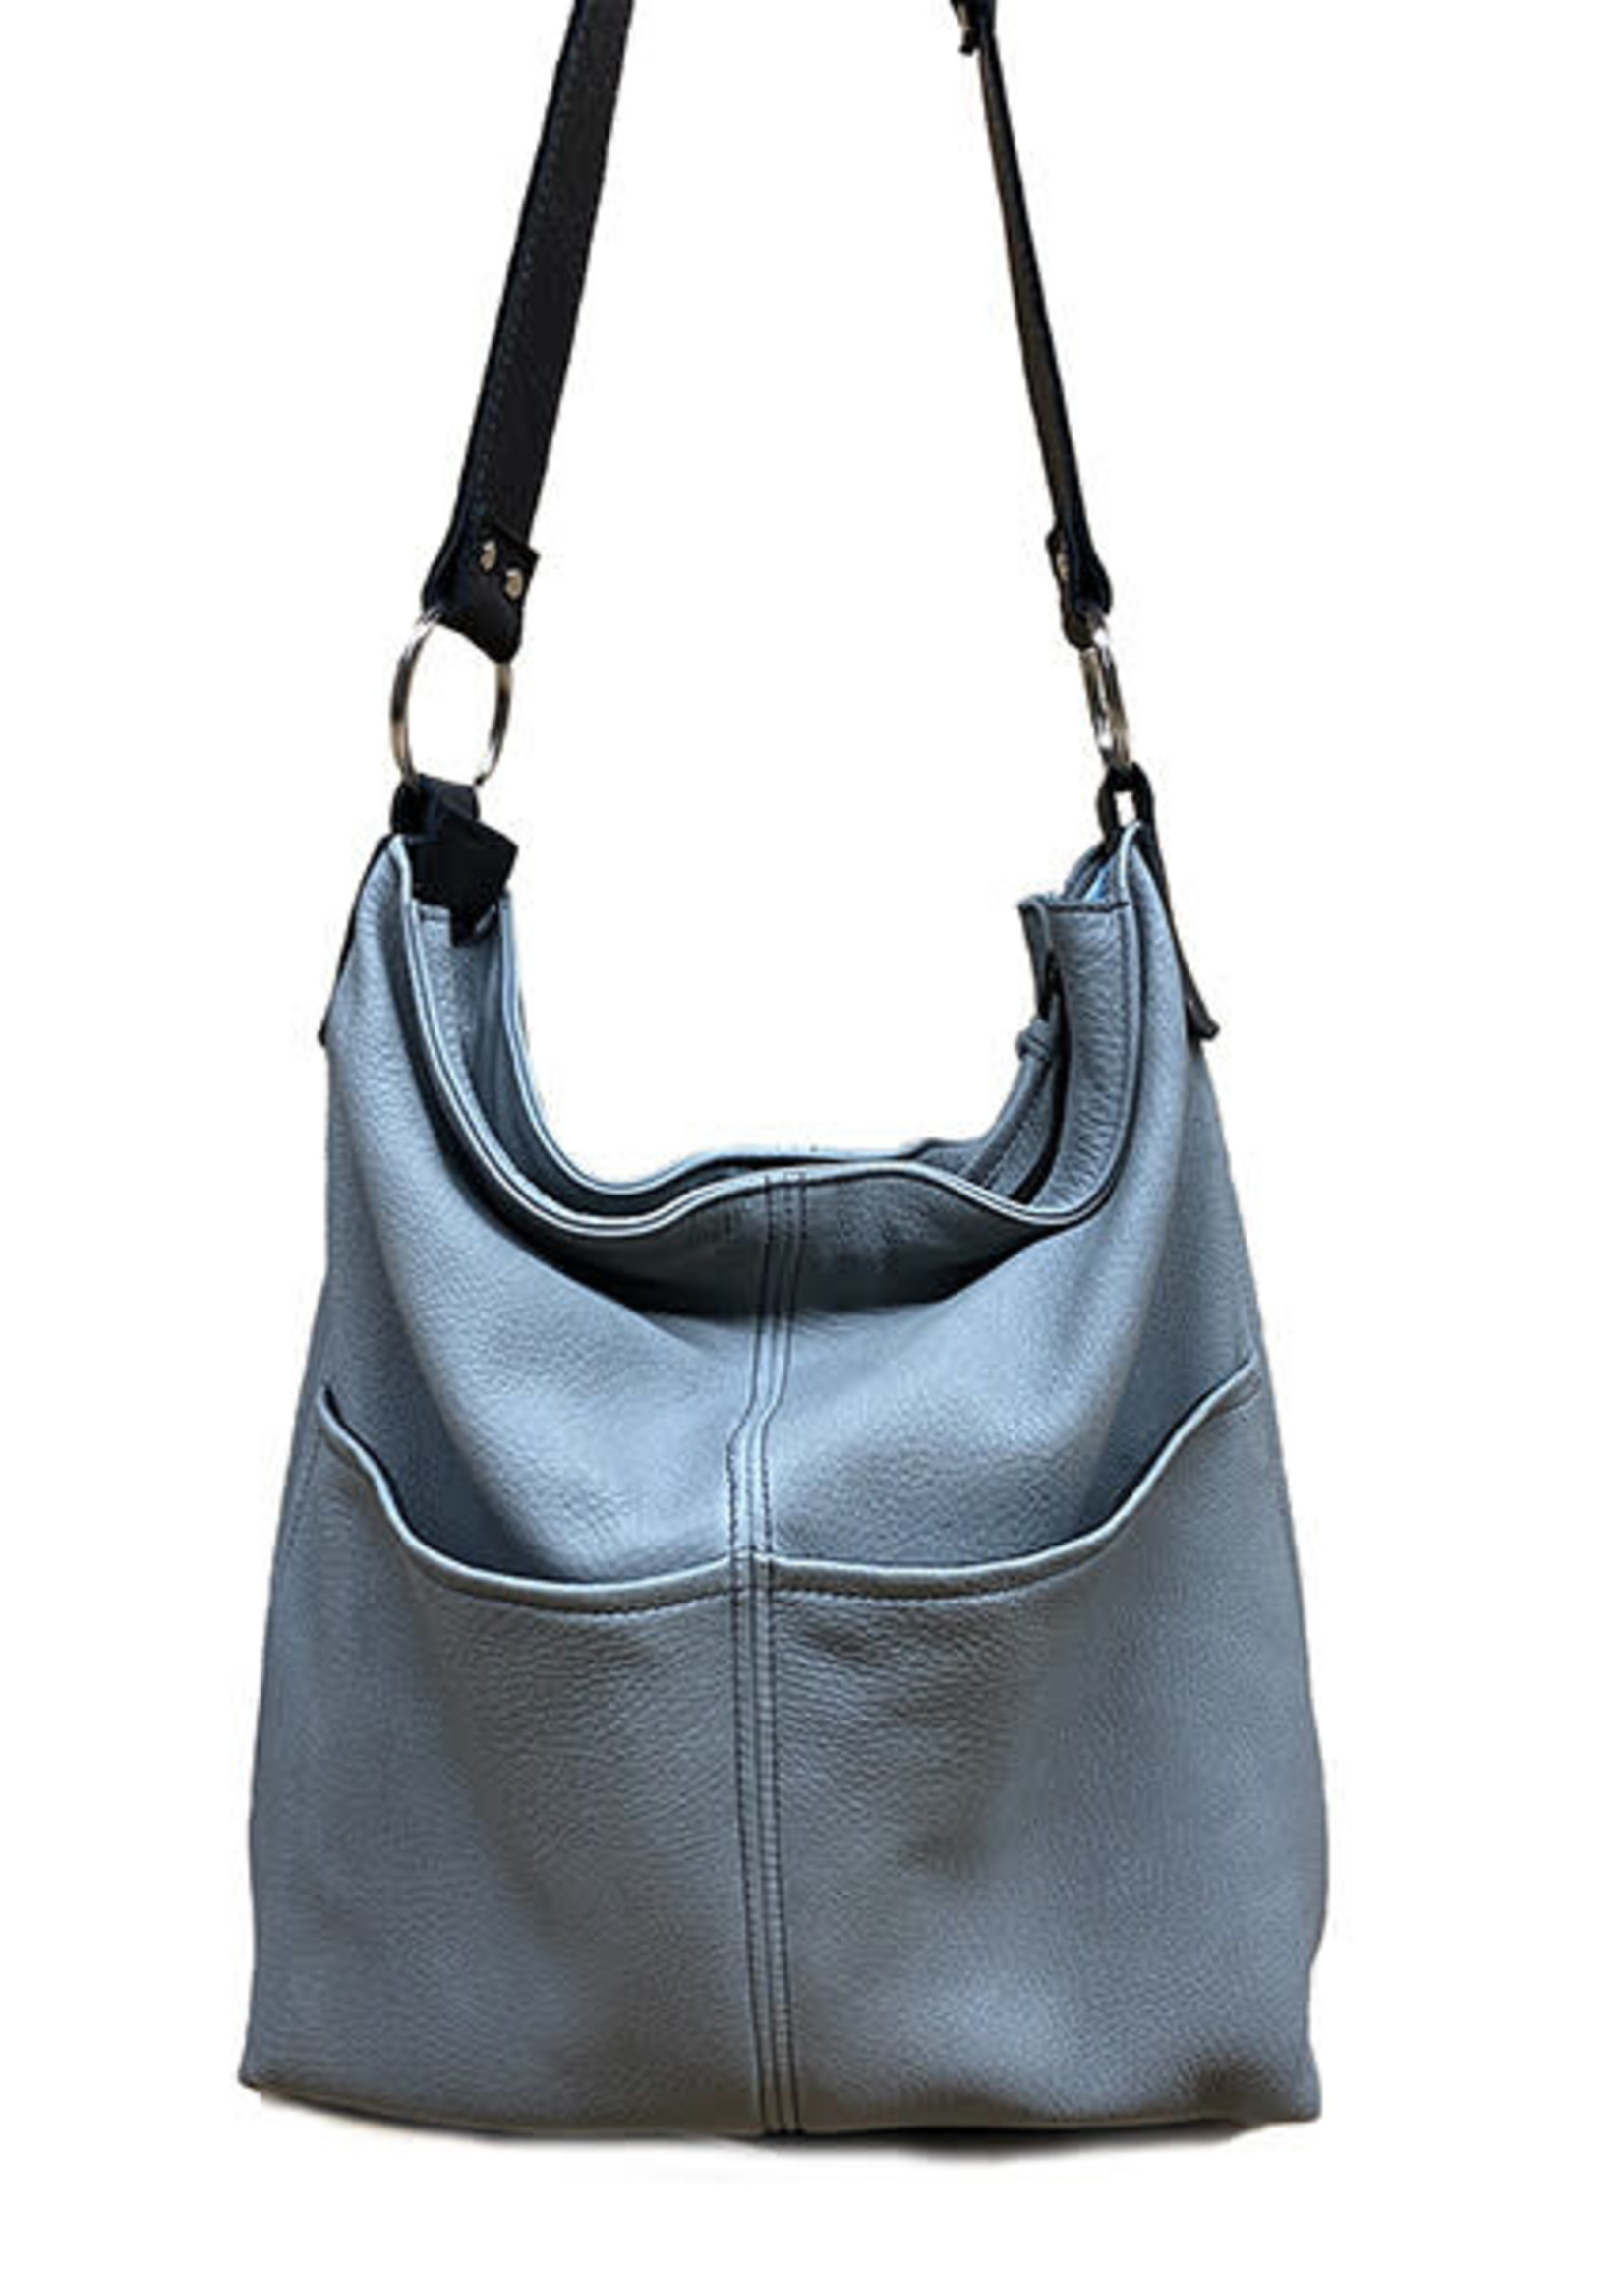 Hides in Hand Bucket Bag Purse with Pocket